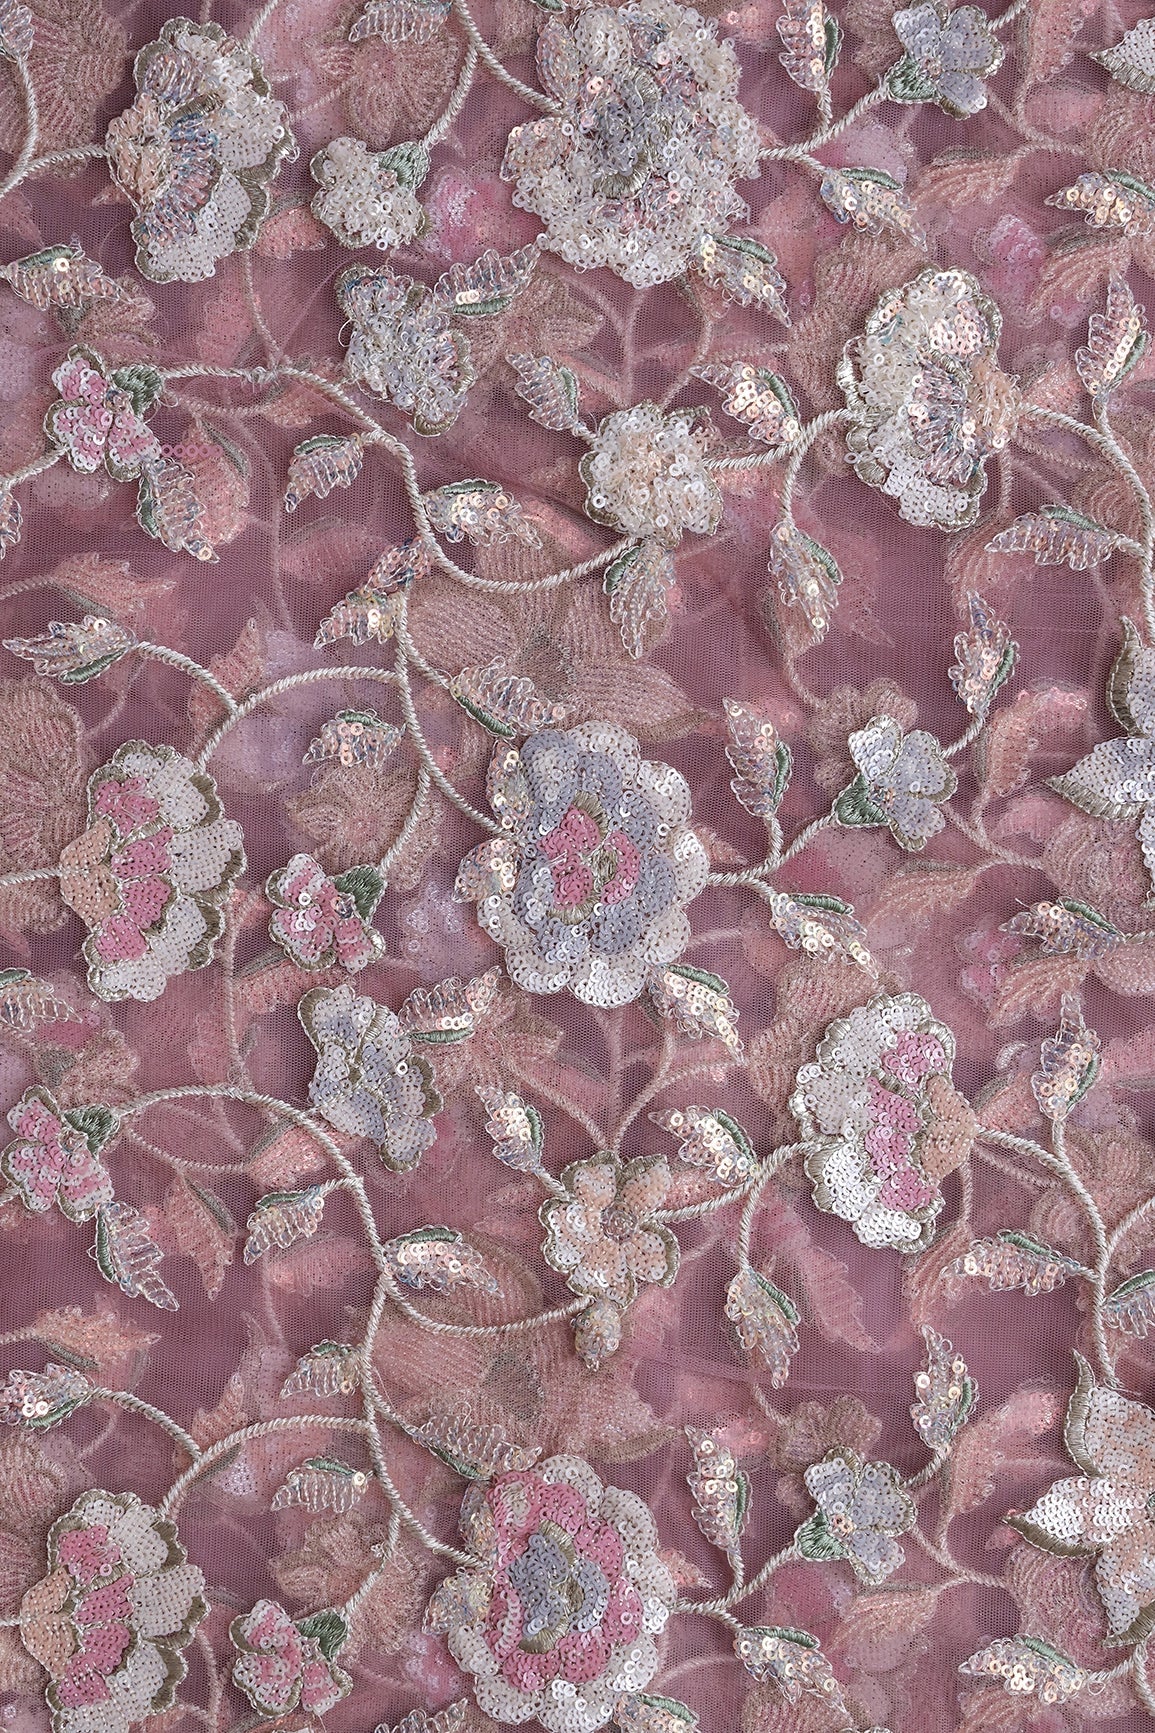 4 Meter Cut Piece Of White Thread With Multi Sequins Beautiful Floral Embroidery On Pink Soft Net Fabric - doeraa